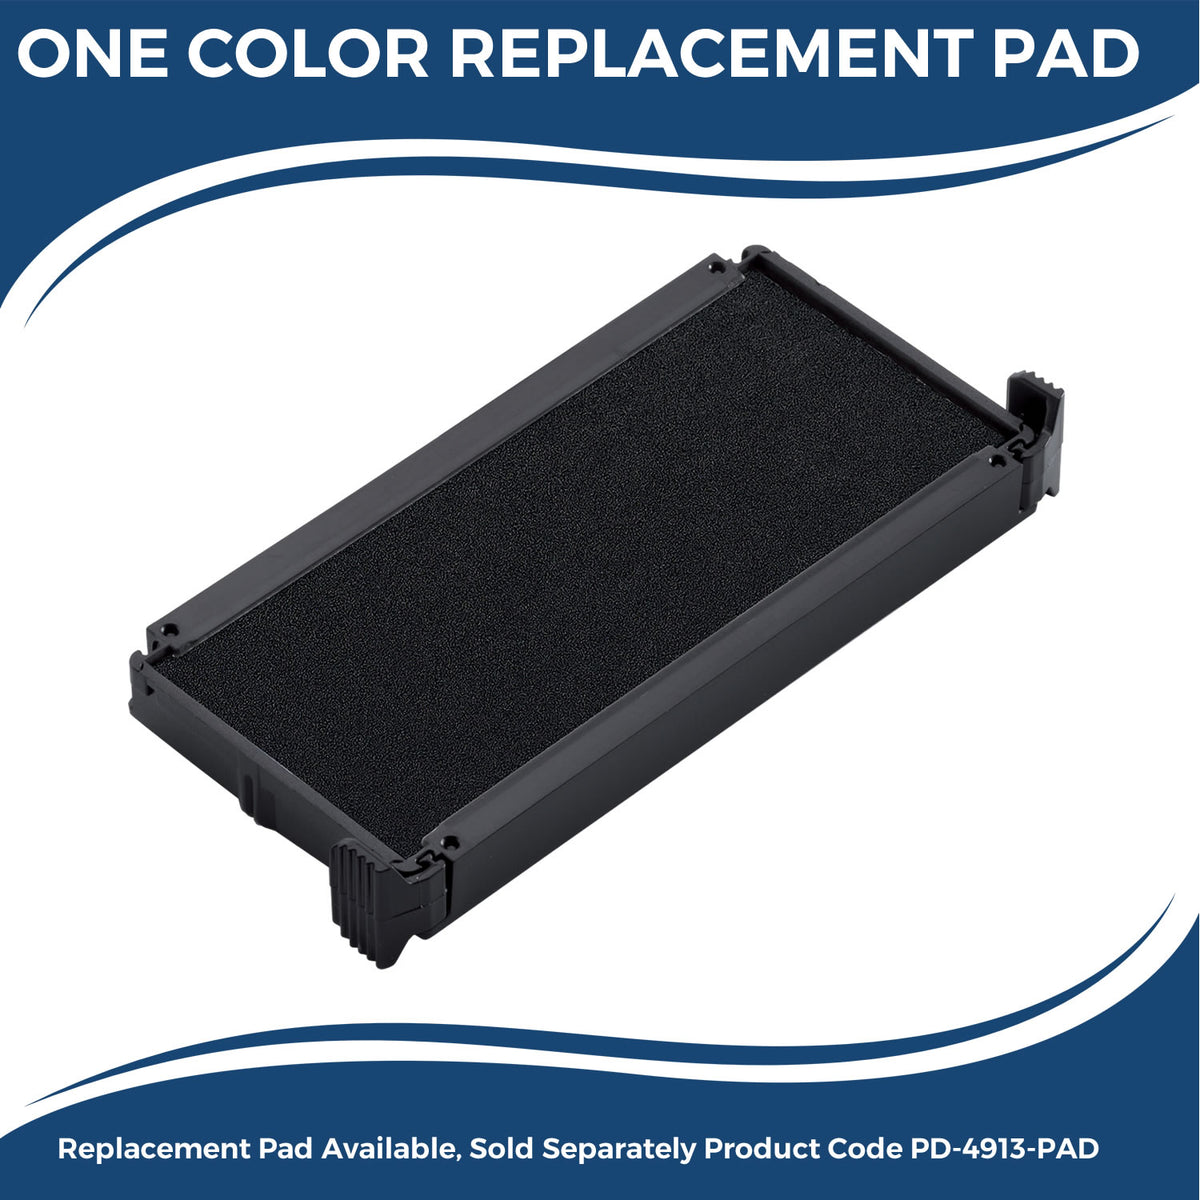 Large Self-Inking Temporarily Away Stamp 5582S Large Replacment Pad